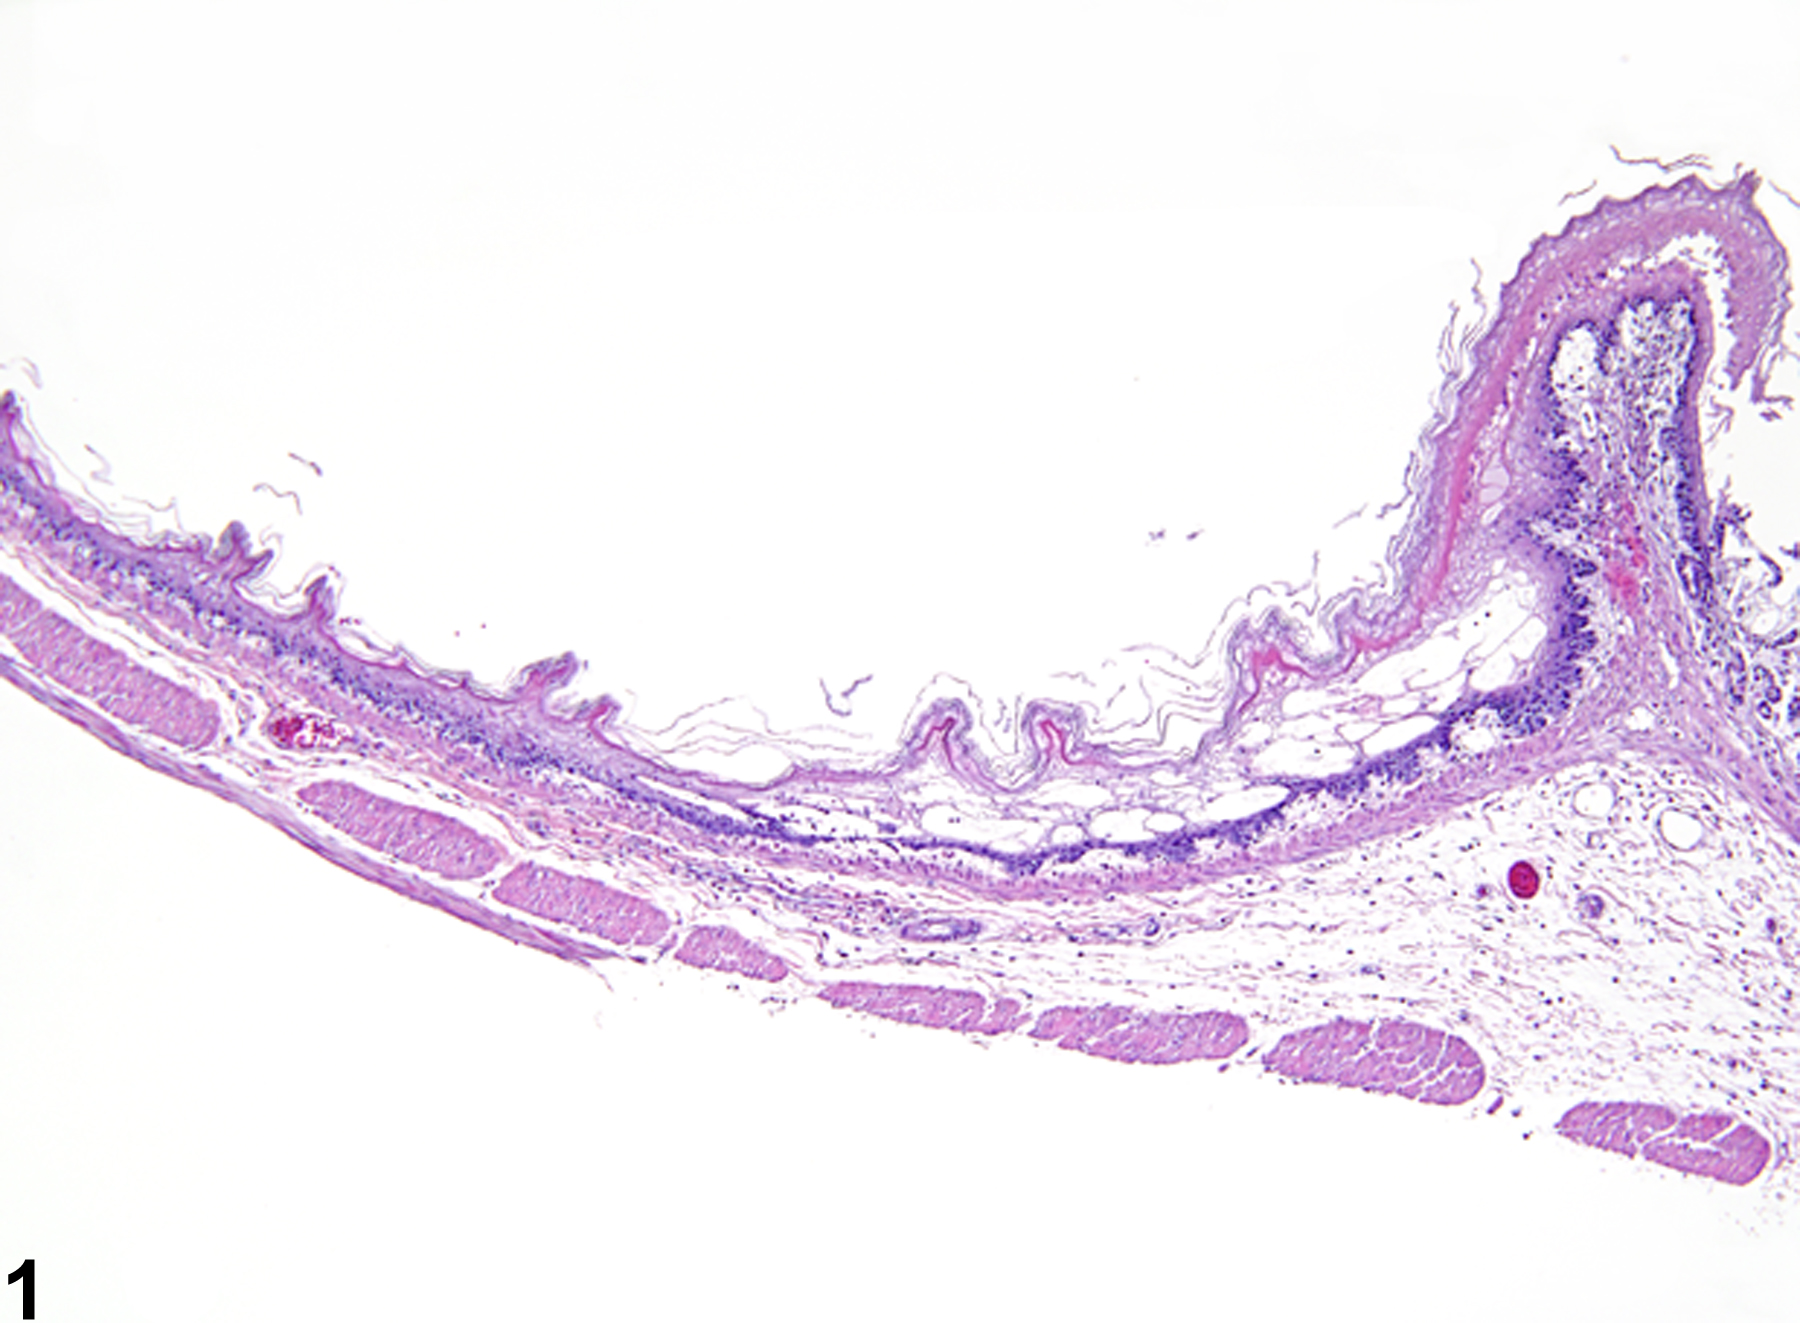 Image of degeneration in the forestomach epithelium from a female F344/N rat in a subchronic study